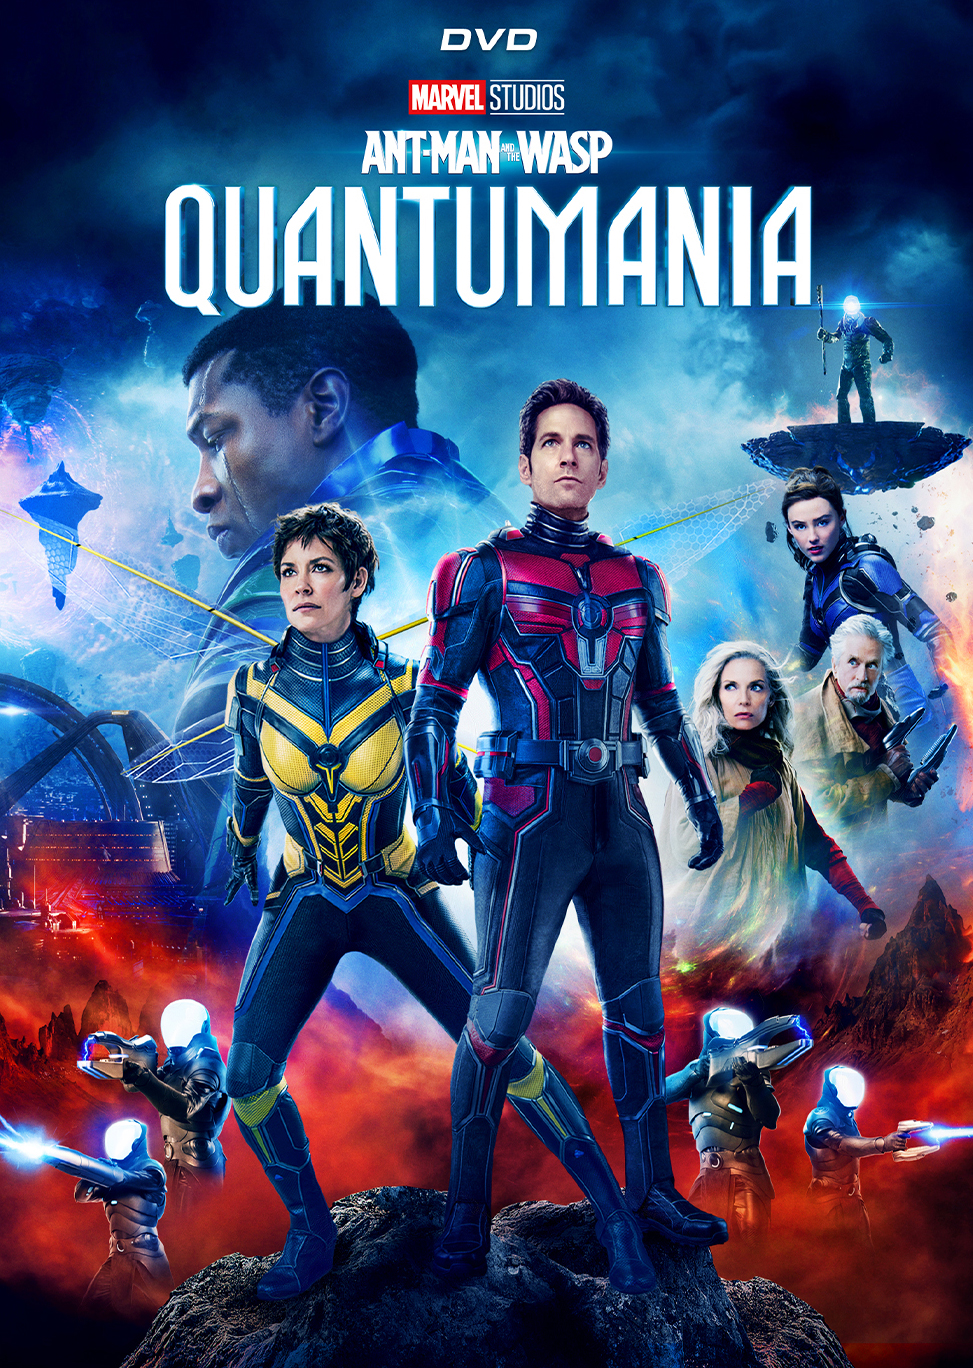 Ant-Man and the Wasp: Quantumania Cinema Release